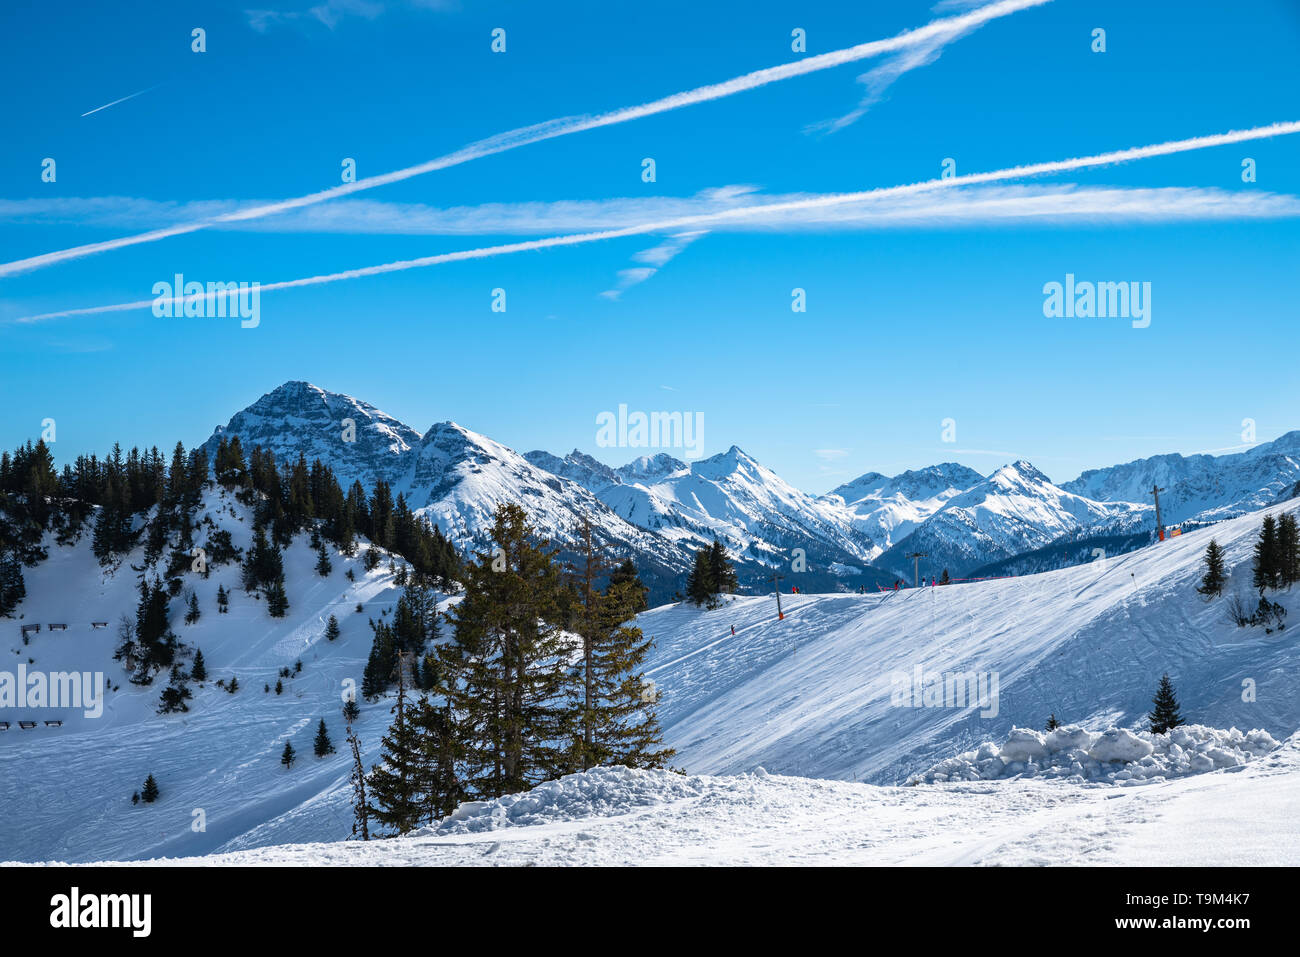 Panorama view of  snow covered Austrian Alps in winter on top of Reutte cable car station, with ski slop in foreground, Tyrol, Austria Stock Photo